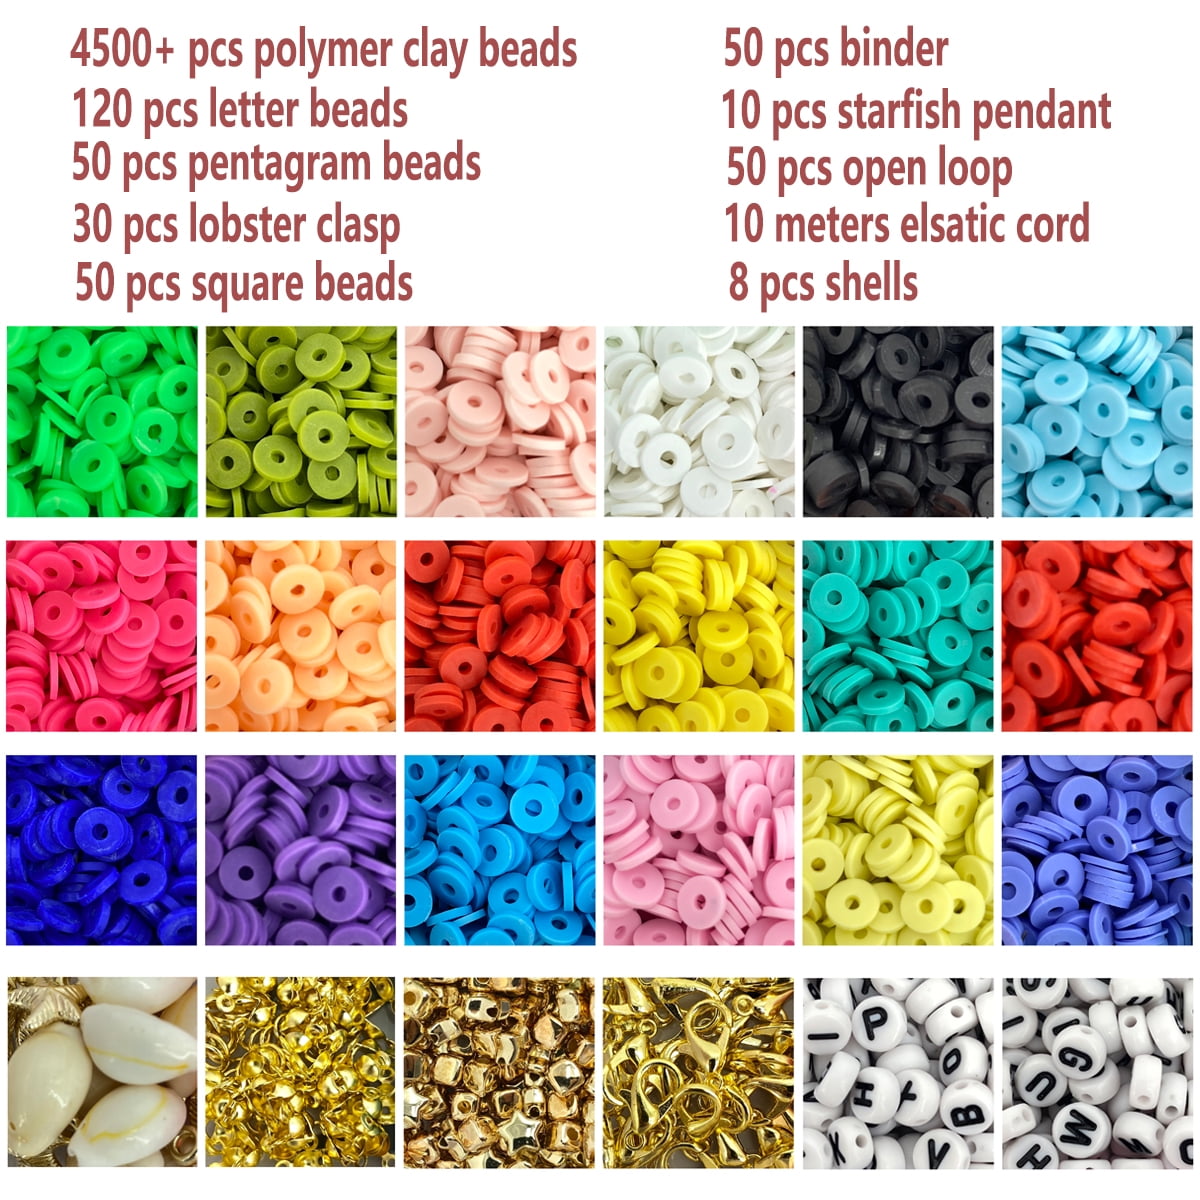 Funtopia Glass Seed Beads for Jewelry Making Kit, 60 Colors 21600 Pcs+  Bracelet Making Kit, Friendship Bracelets Kit with Letter Beads for DIY,  Art and Craft, Gift for 6 7 8 9 10 Teens Adults, 4mm 